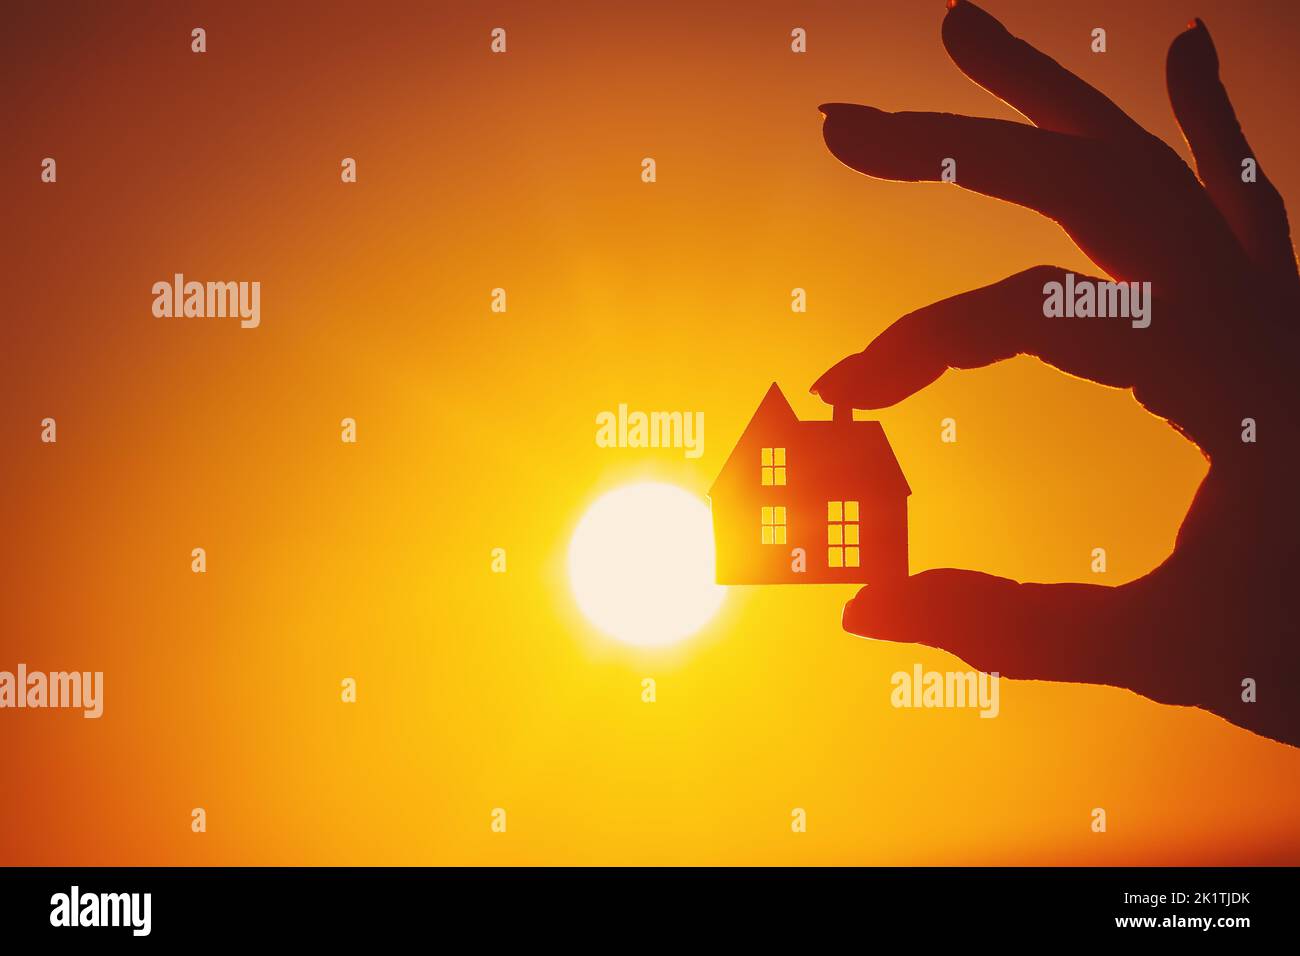 Woman's hand holding a model of a house on sunset evening Stock Photo